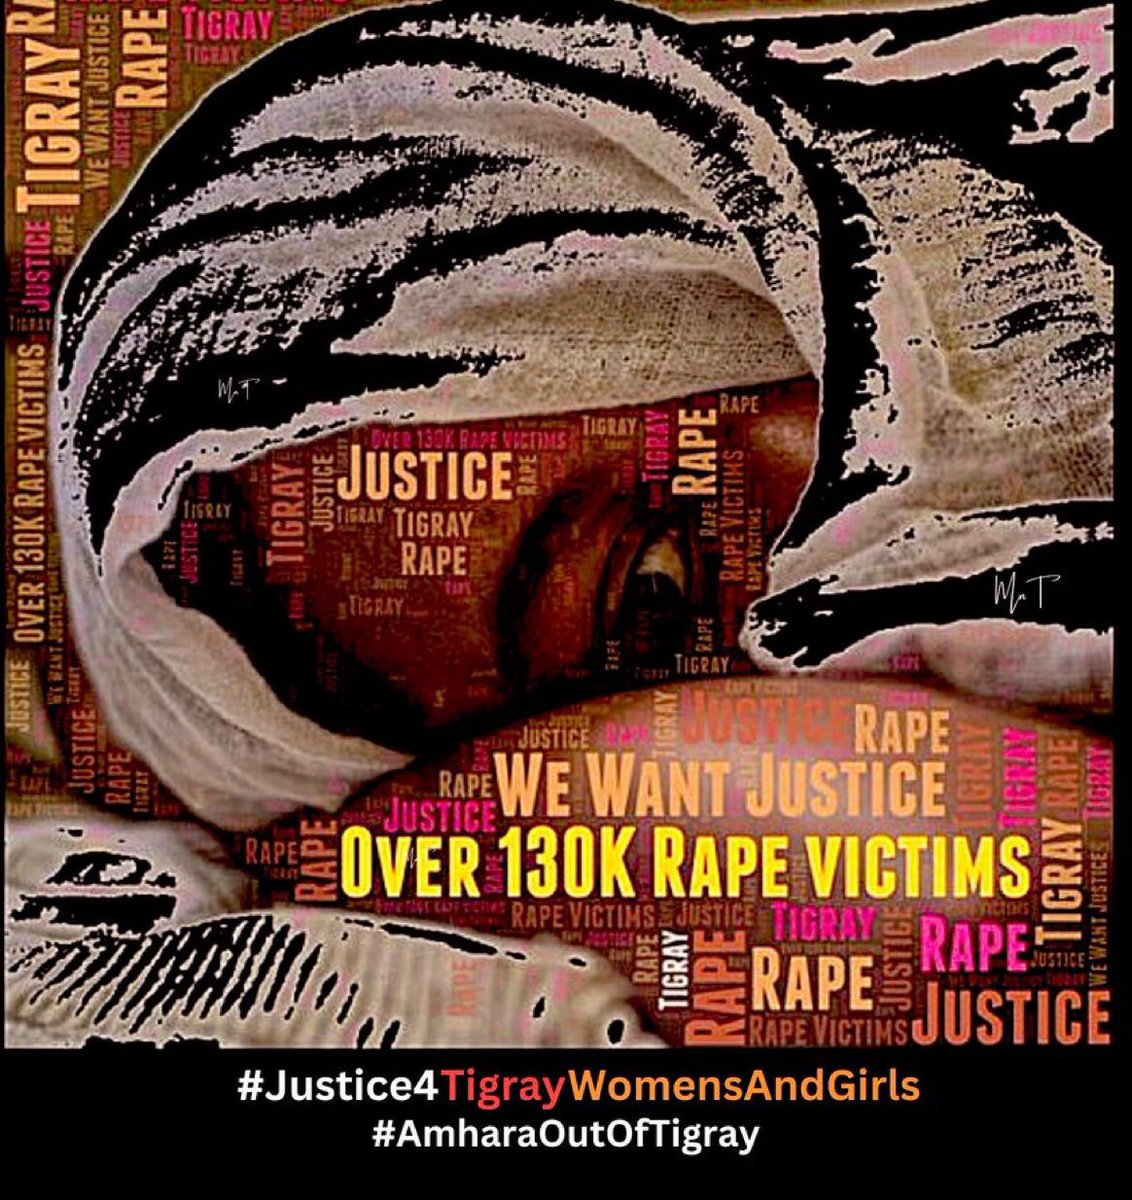 📌The Int’l community has abandoned the most vulnerable. Women were subjected to gang rape, sexual slavery, and sexual mutilation. We are ask that you amplify their voices #Justice4TigrayWomenAndGirl #EndRapeInWar @rihanna @Oprah @violadavis @UN_Women